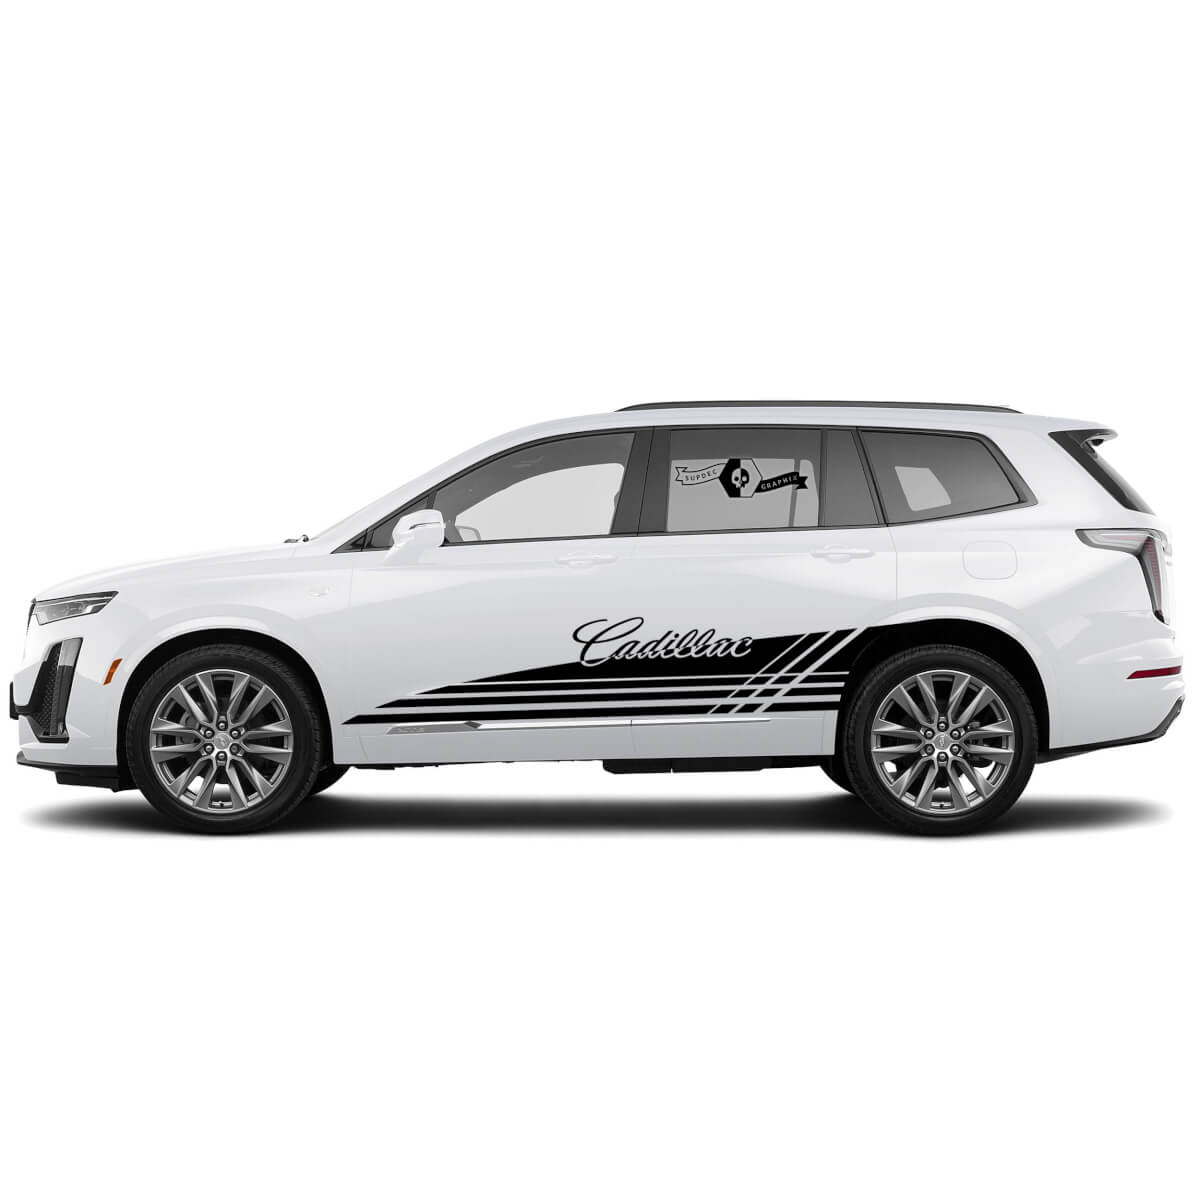 2 New Decal Sticker Stylish Rocker Panel Accent  Lines Wrap vinyl Decal for Cadillac XT6
